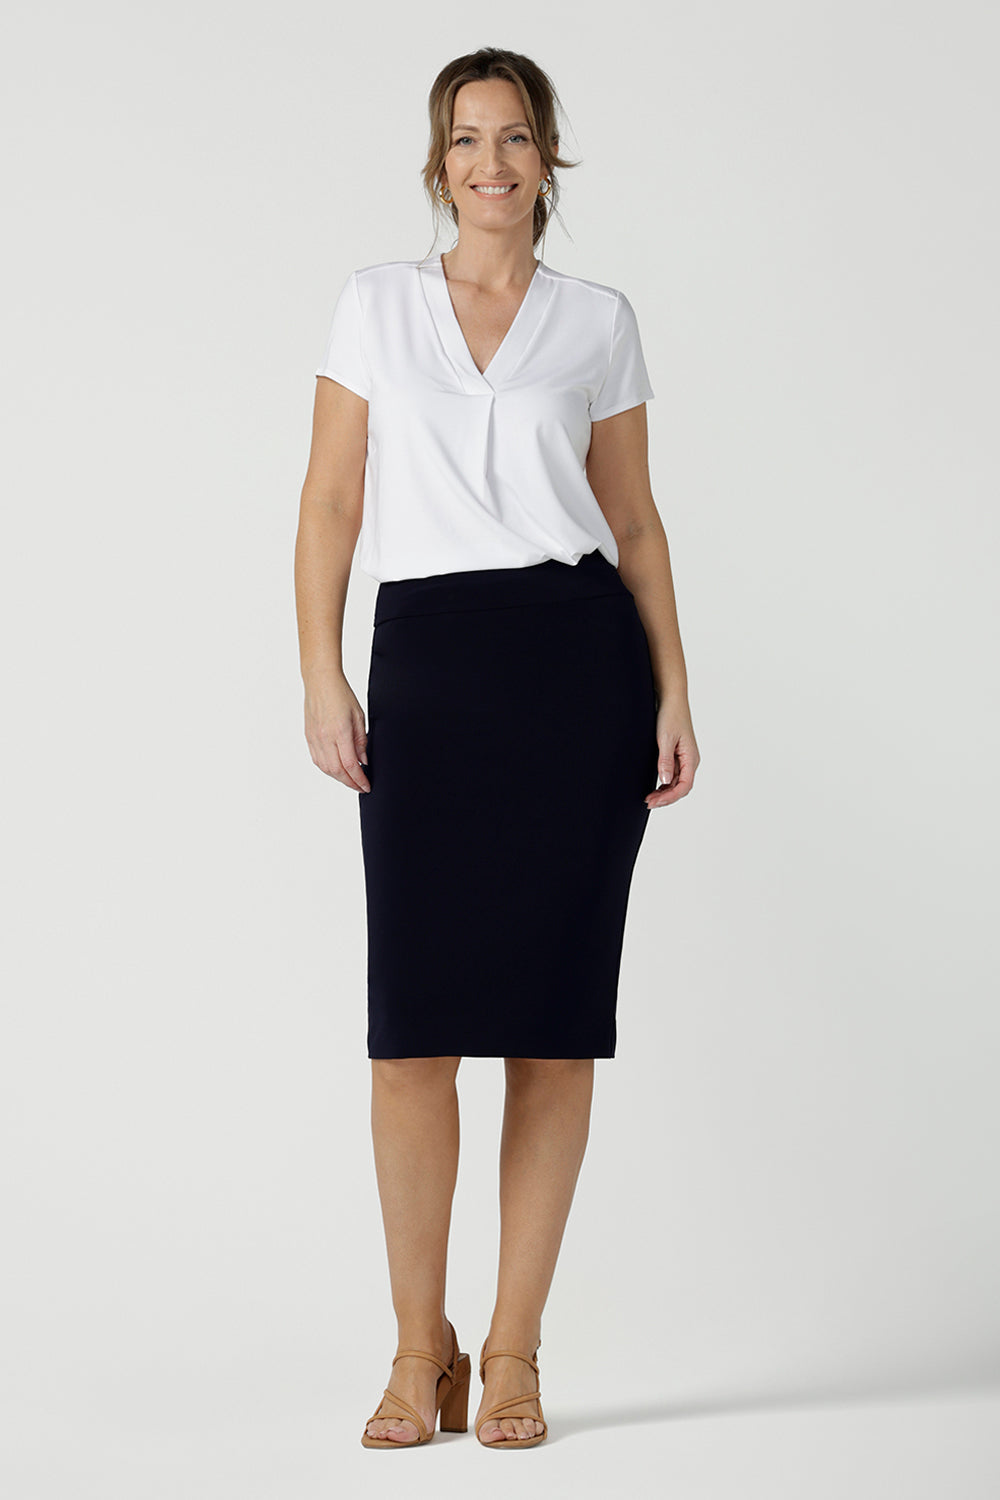 A good navy skirt for women's workwear, this stretch jersey tube skirt moulds to the curves. Great as an office skirt, this navy knee length pull-on skirt is worn with a V-neck white bamboo jersey top with short sleeves.